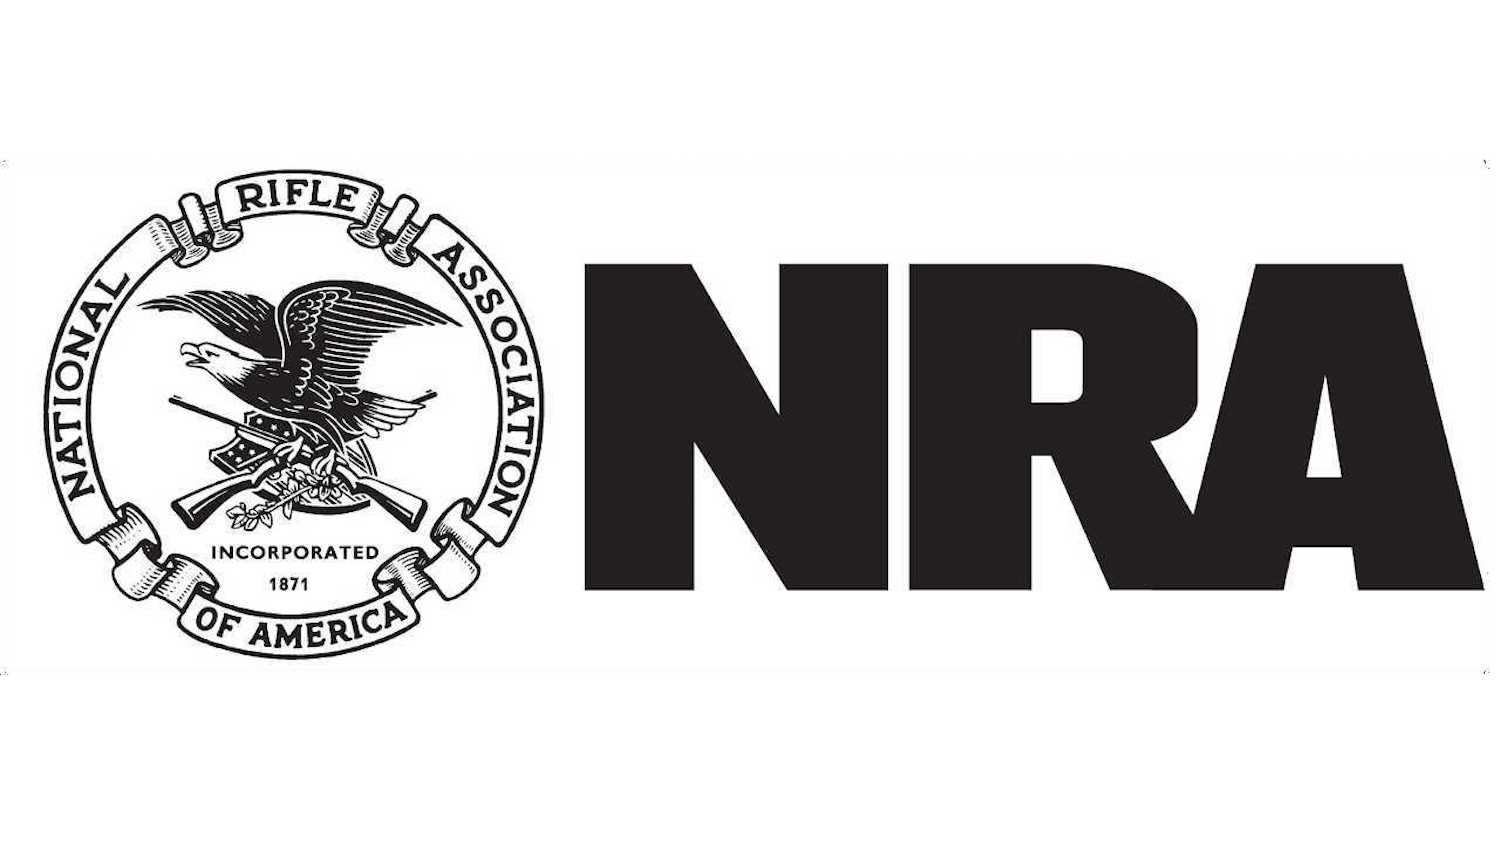 Statement By NRA Executive Vice President & CEO Wayne LaPierre on NRA's New Official Facebook Page 